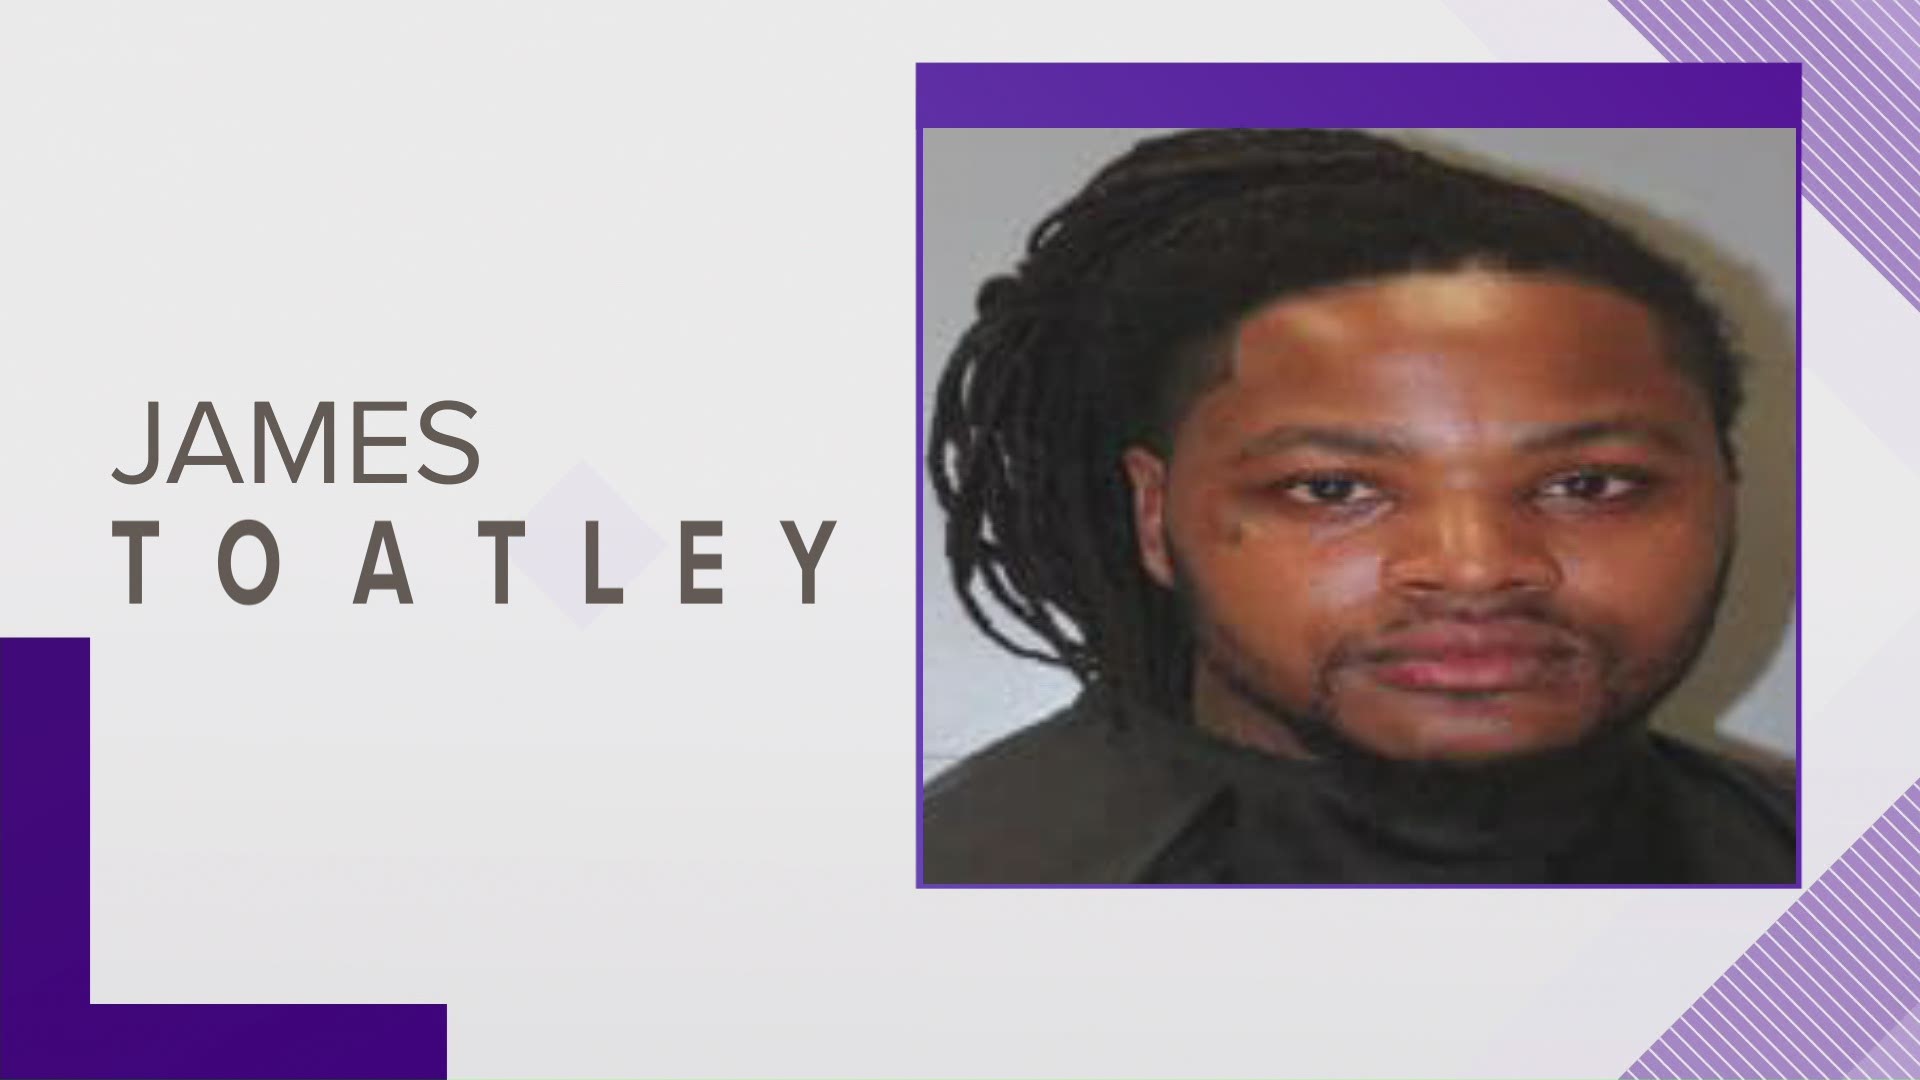 Deputies are looking for 31-year-old James Toatley.